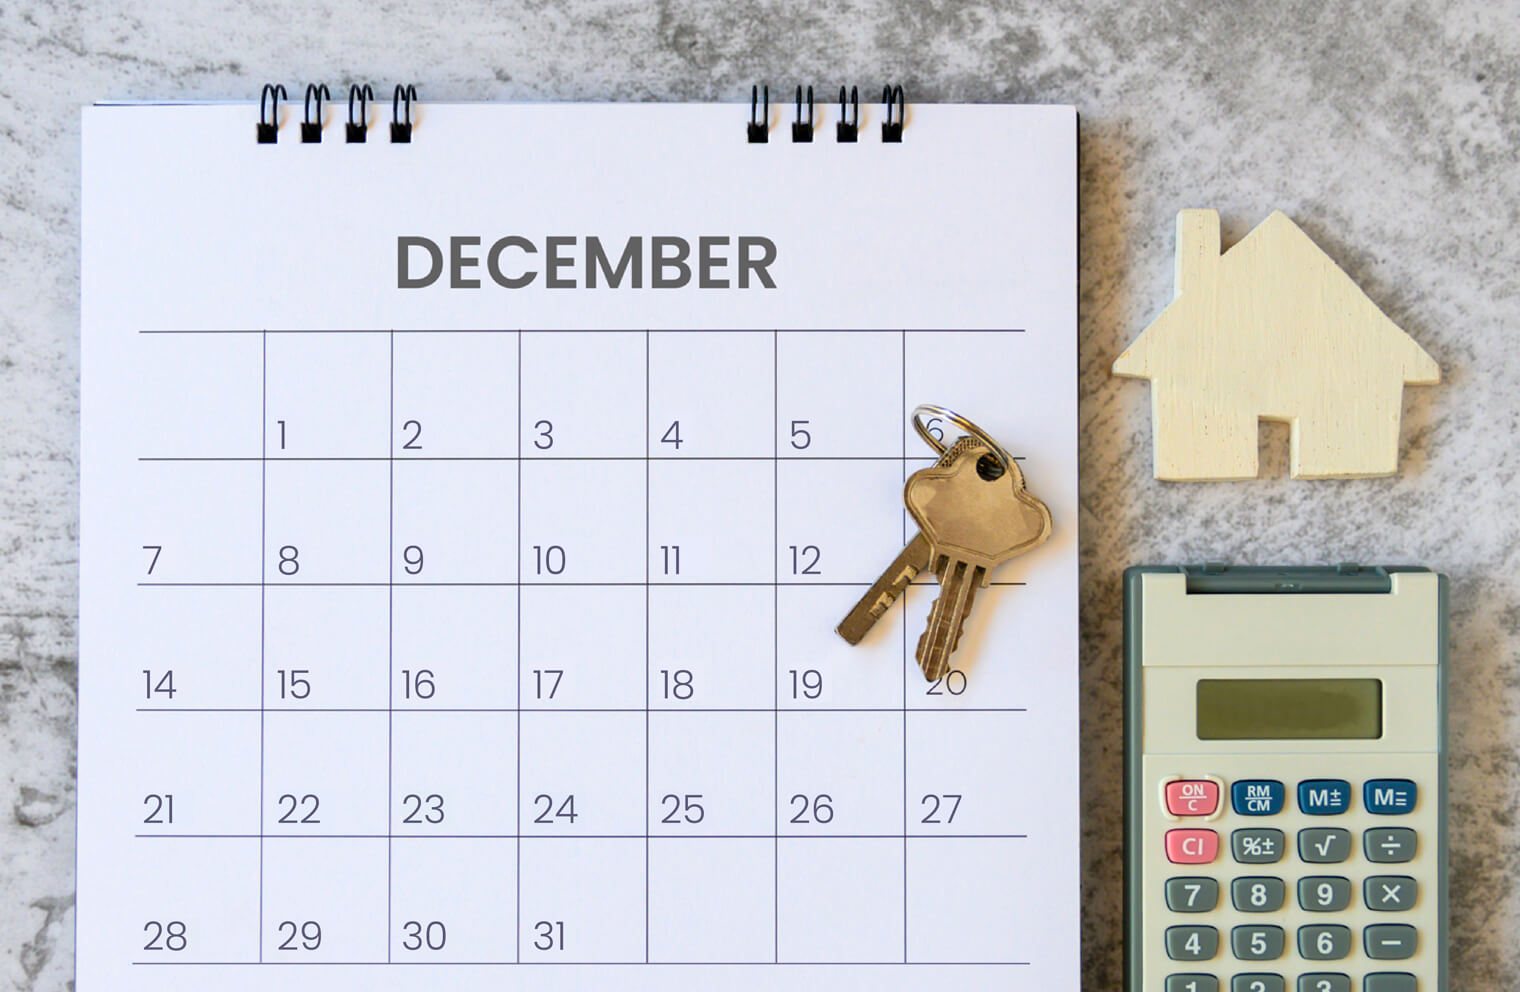 Picture of a calendar with the month of December showing. There are a set of house keys on top of it and a calculator next to it.